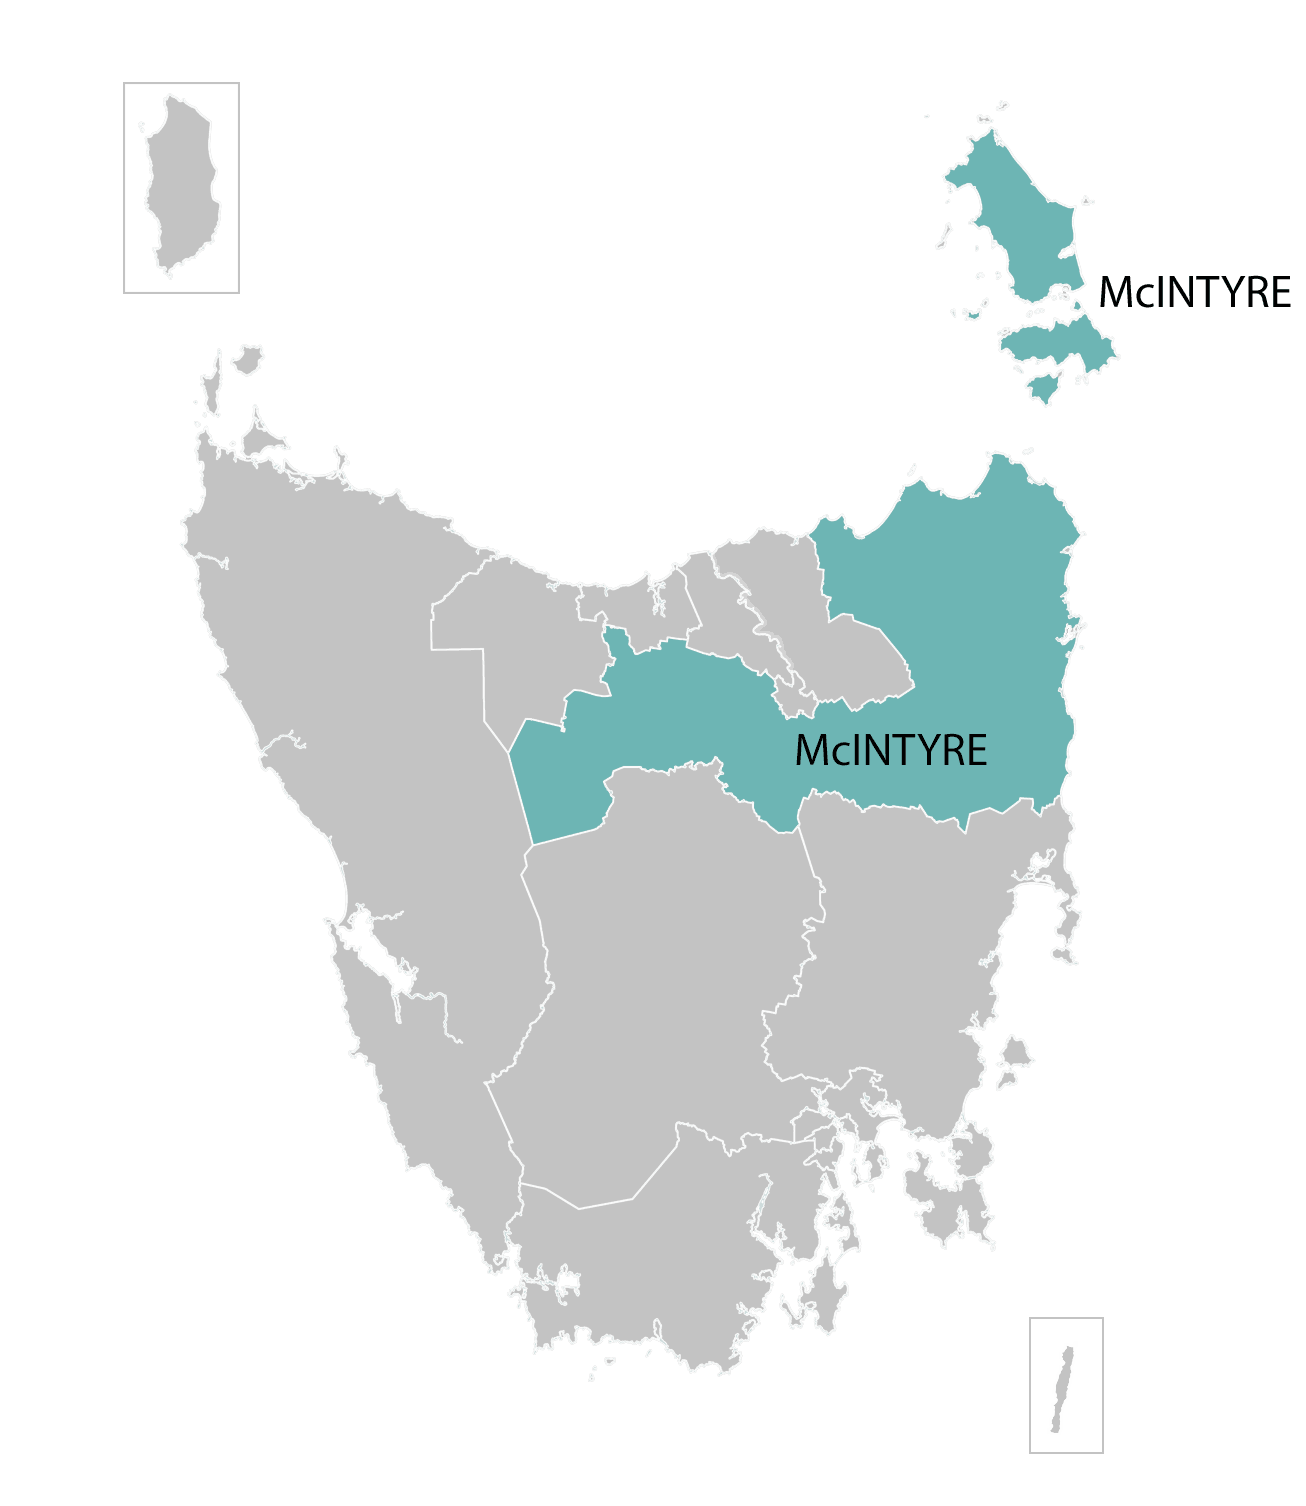 McIntyre division highlighted on illustrated map of Tasmania